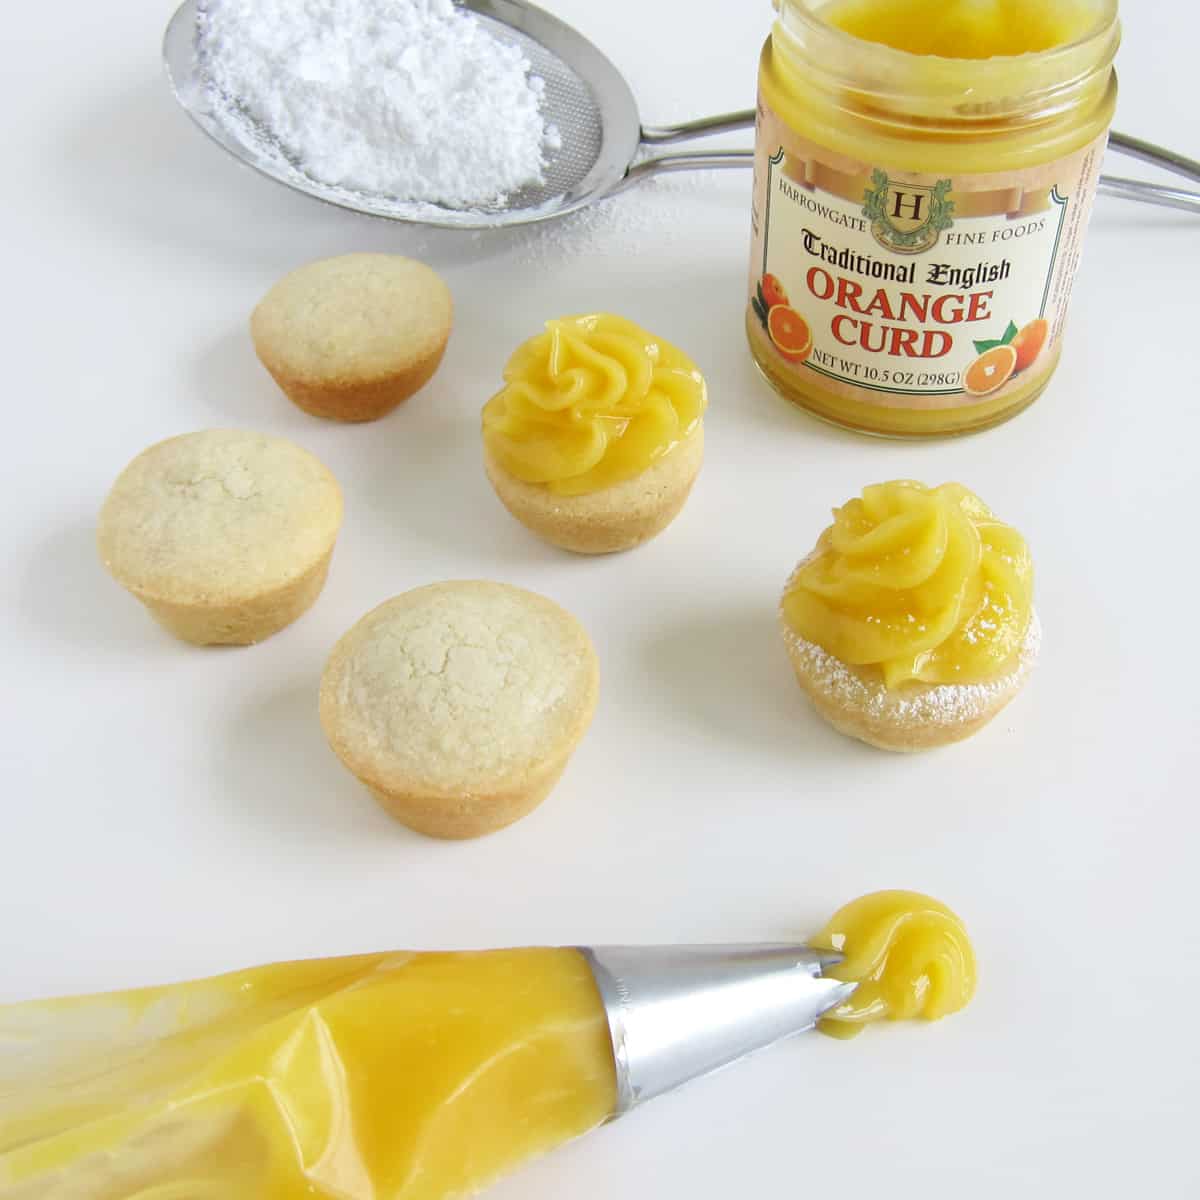 Pipe orange curd on sugar cookie cups then dust with powdered sugar.